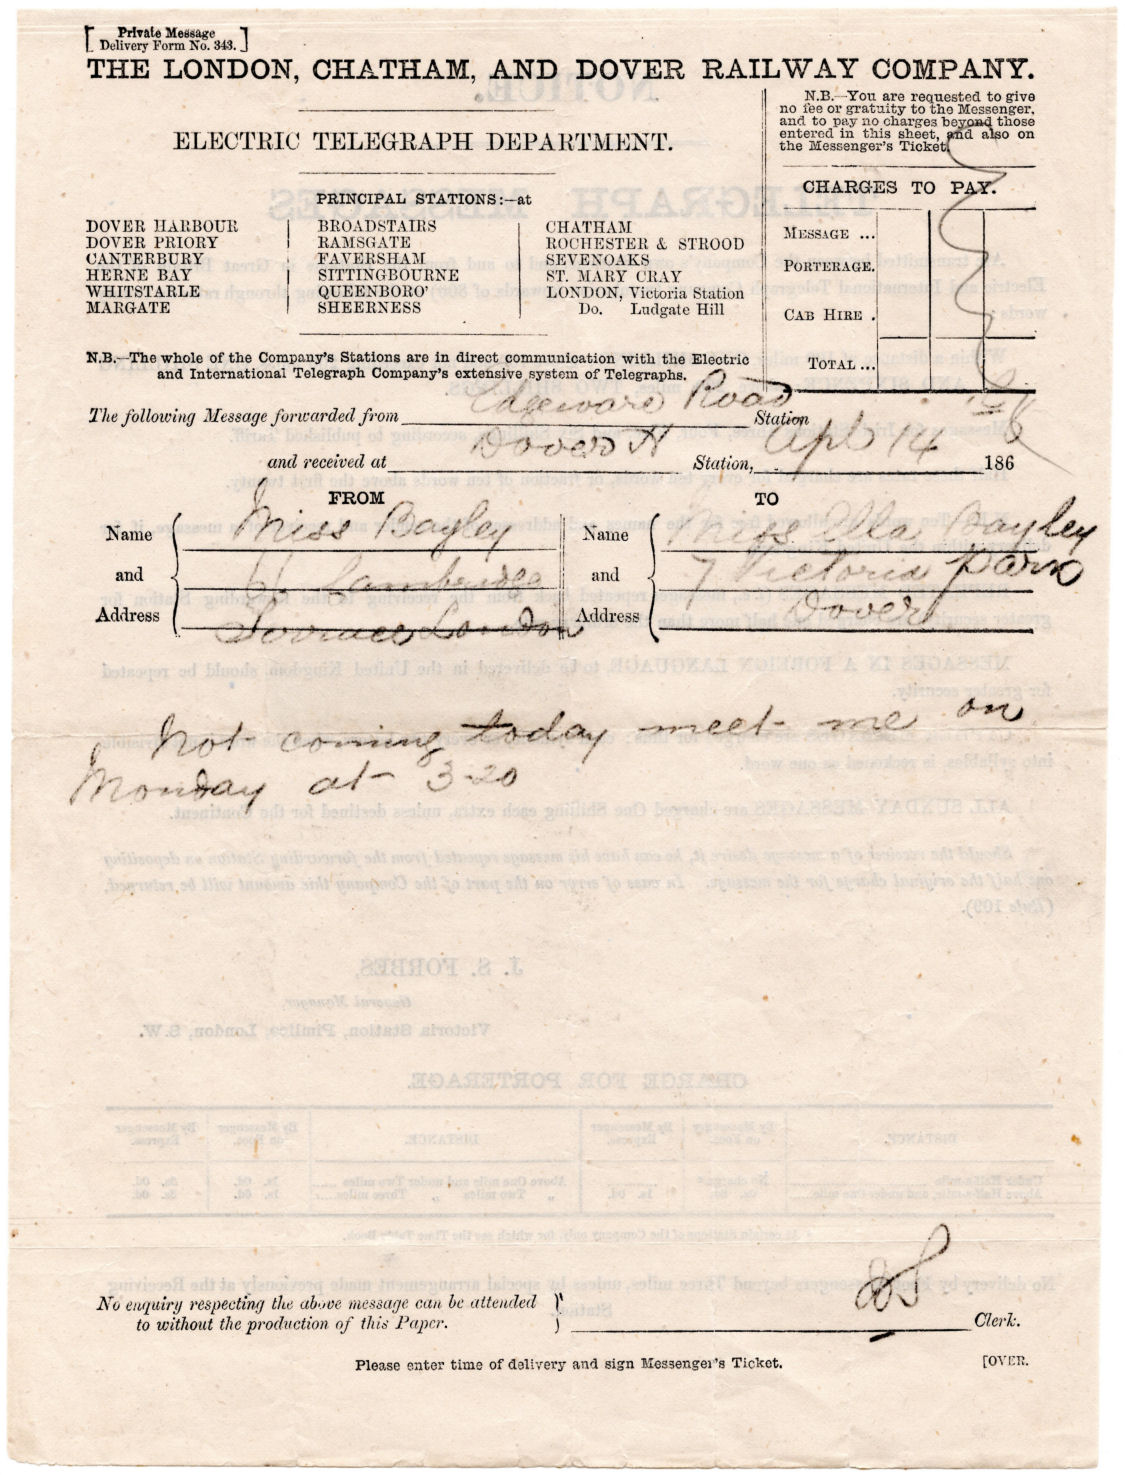 LCDR Private Message Delivery Form No. 343 - front.